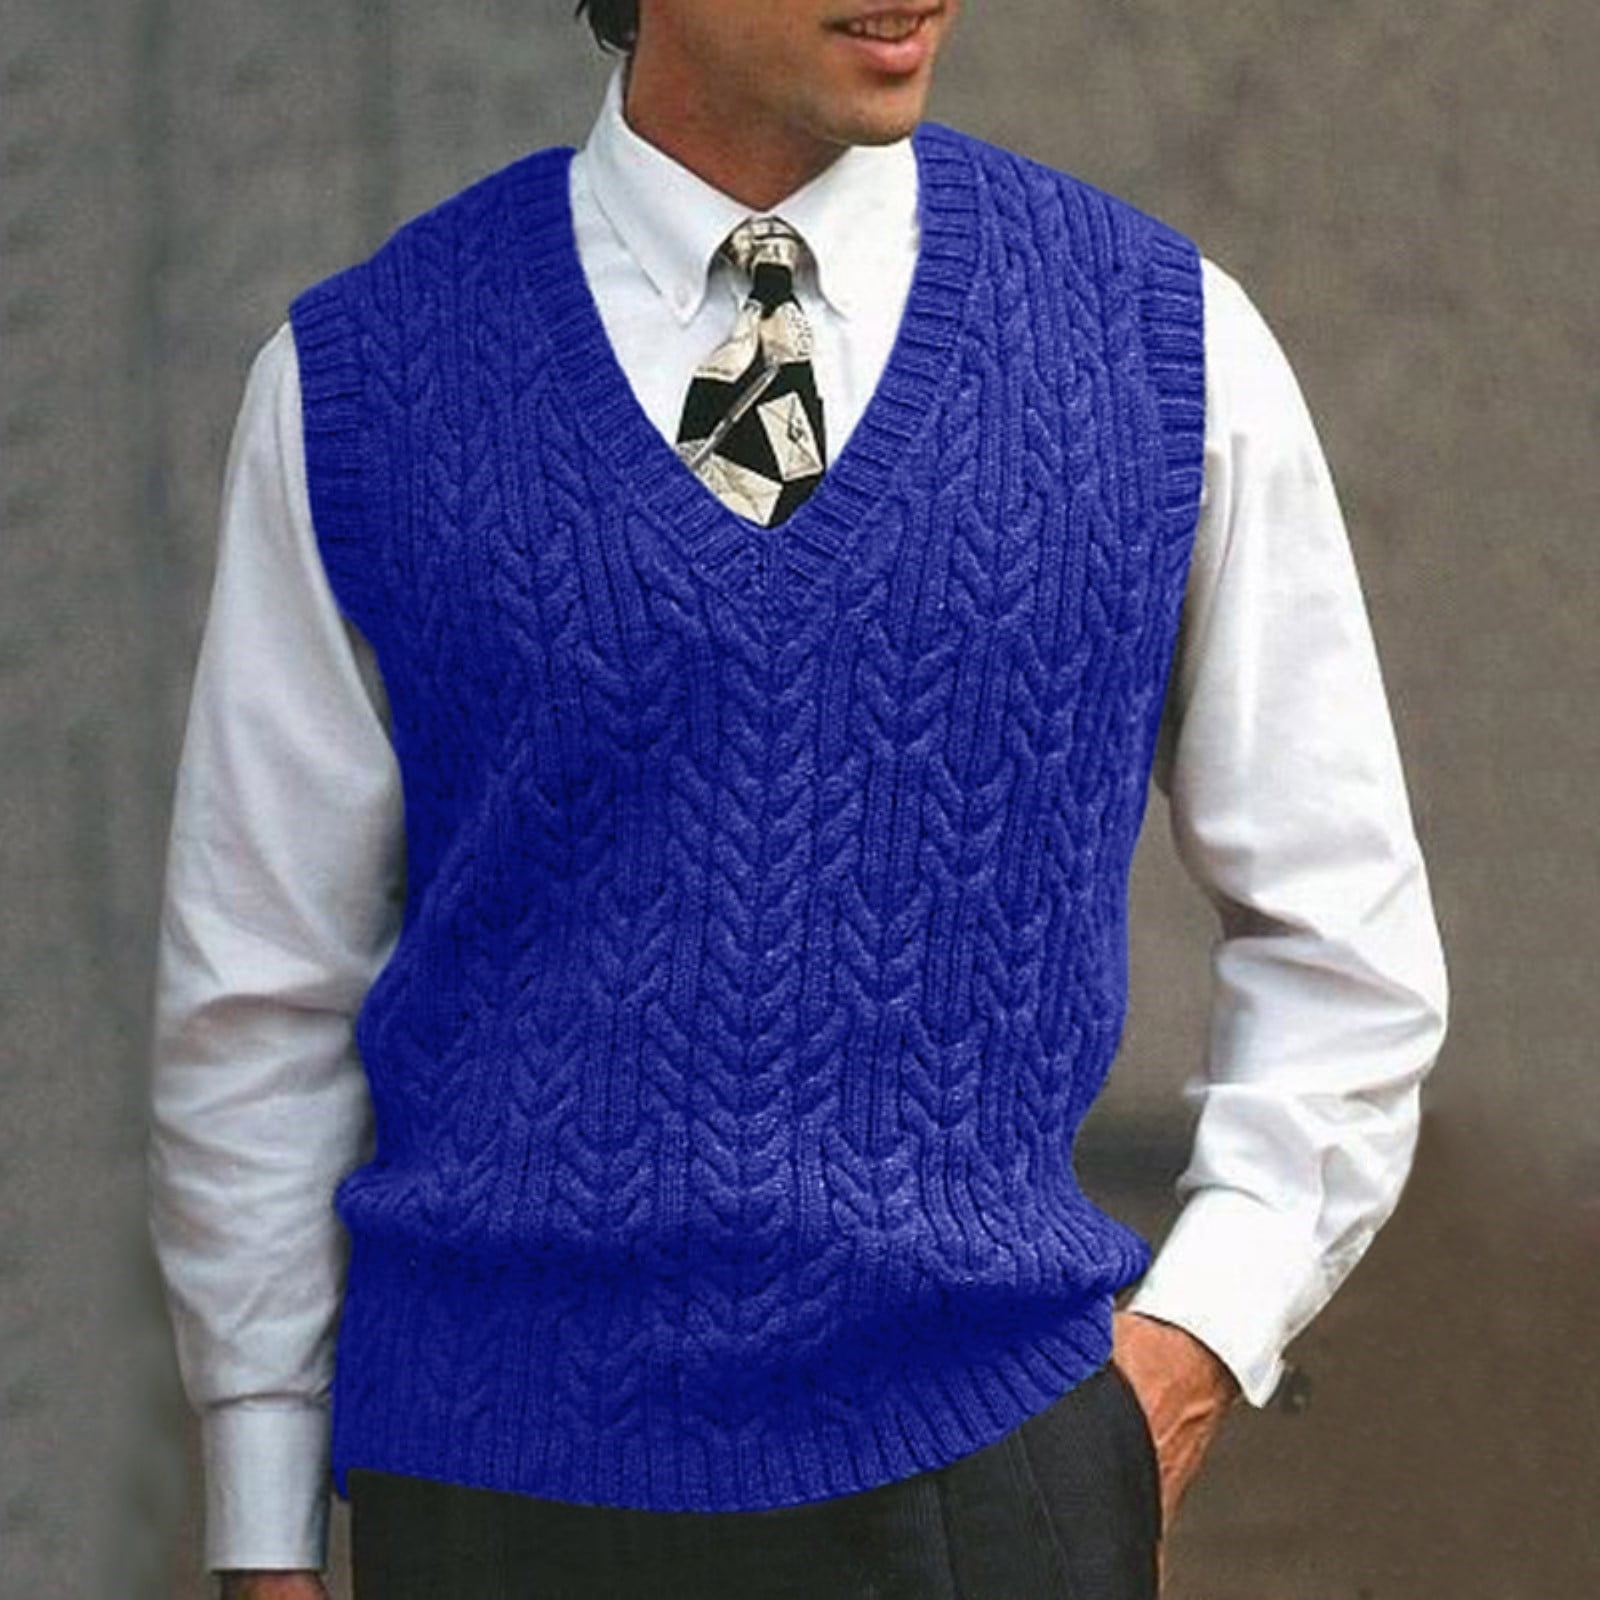 Sweater Vest Male Autumn Winter Casual Solid Knit Sweater Vest ...